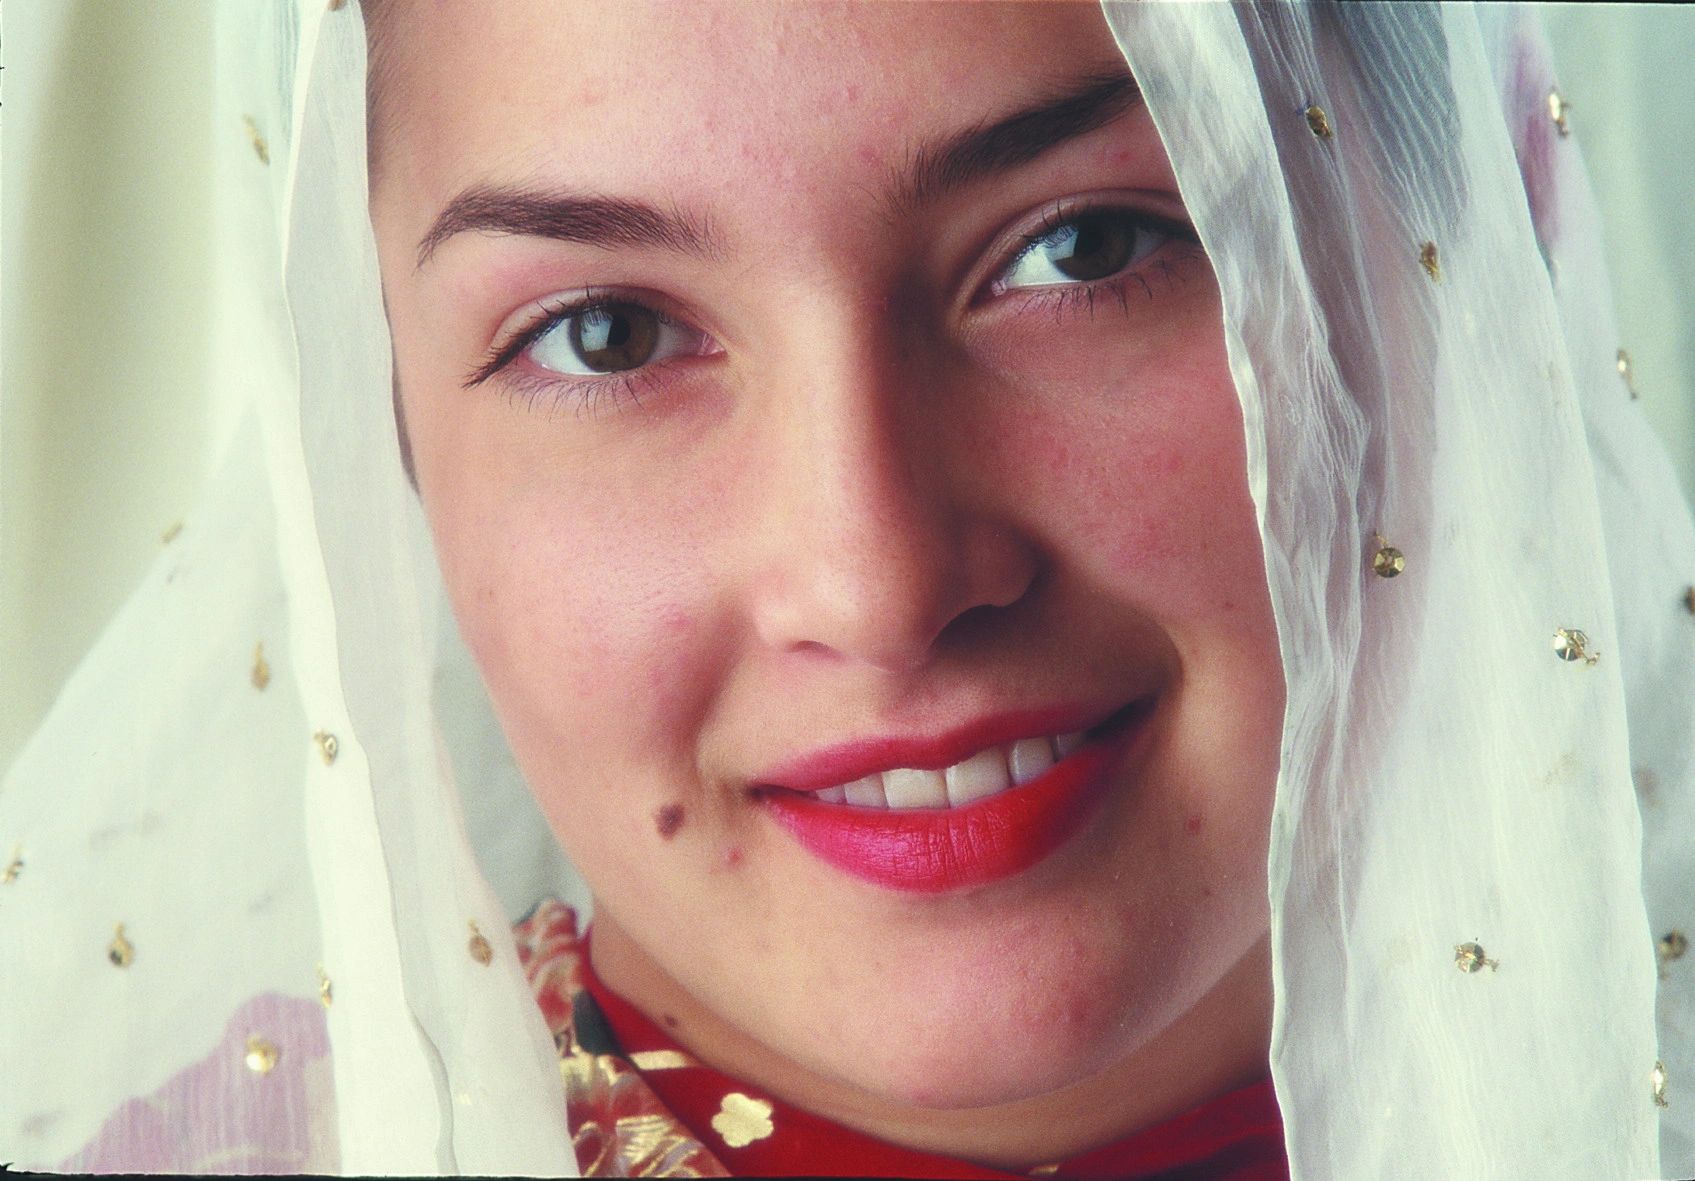 Close-up of a smiling woman with a veil adorned with small golden beads, wearing red lipstick and a red and gold outfit.